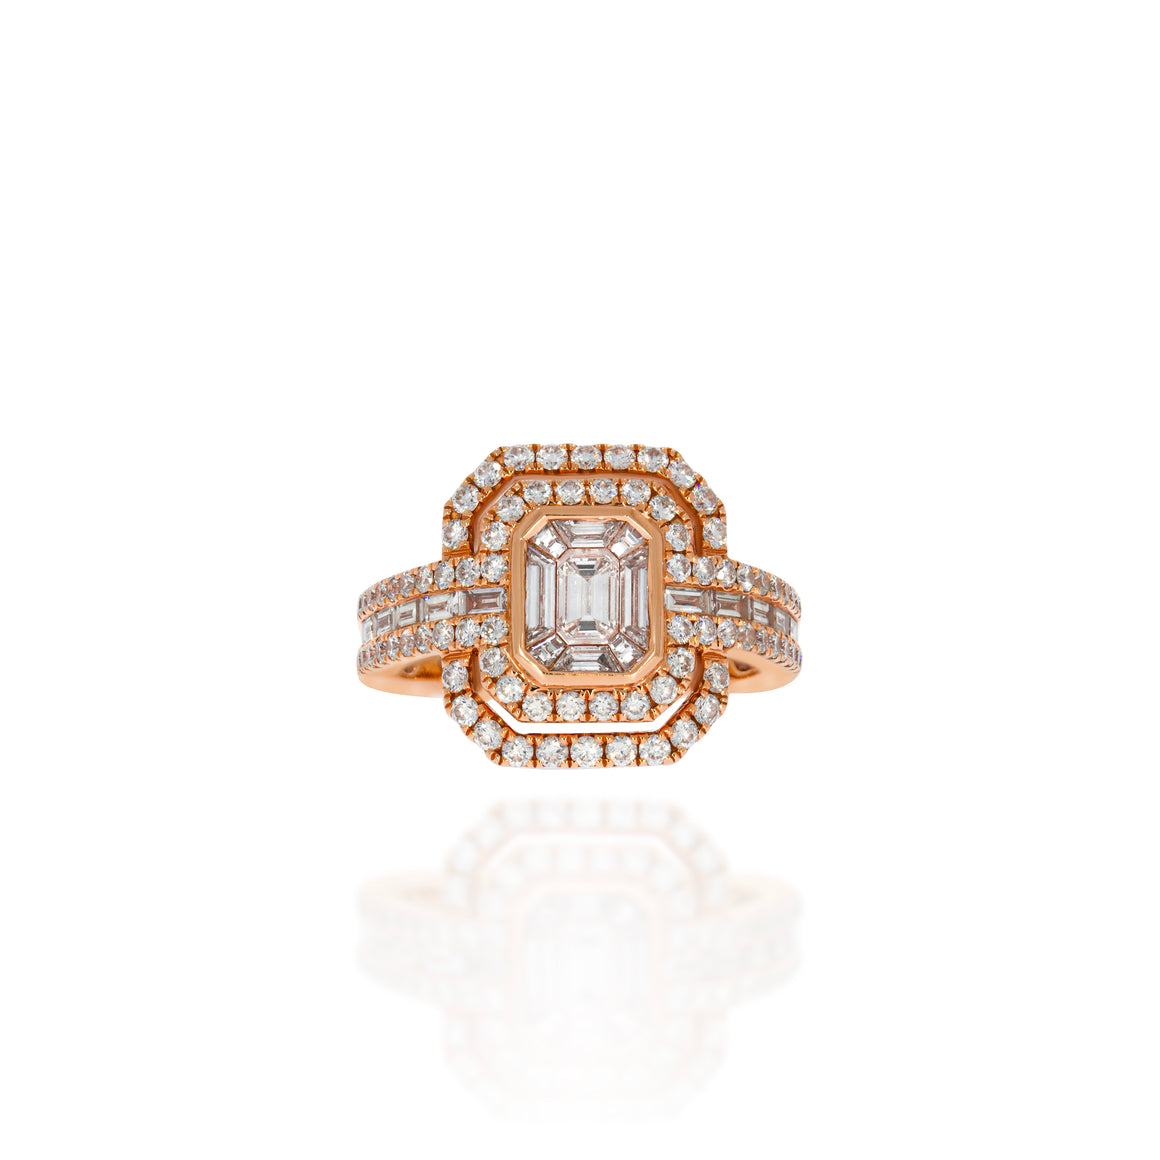 Stunning Invisible Setting Ring big single centerded 1 brilliant cut Baguette diamonds 0.20 ct. surrounded by 1.32 sparkling diamonds.